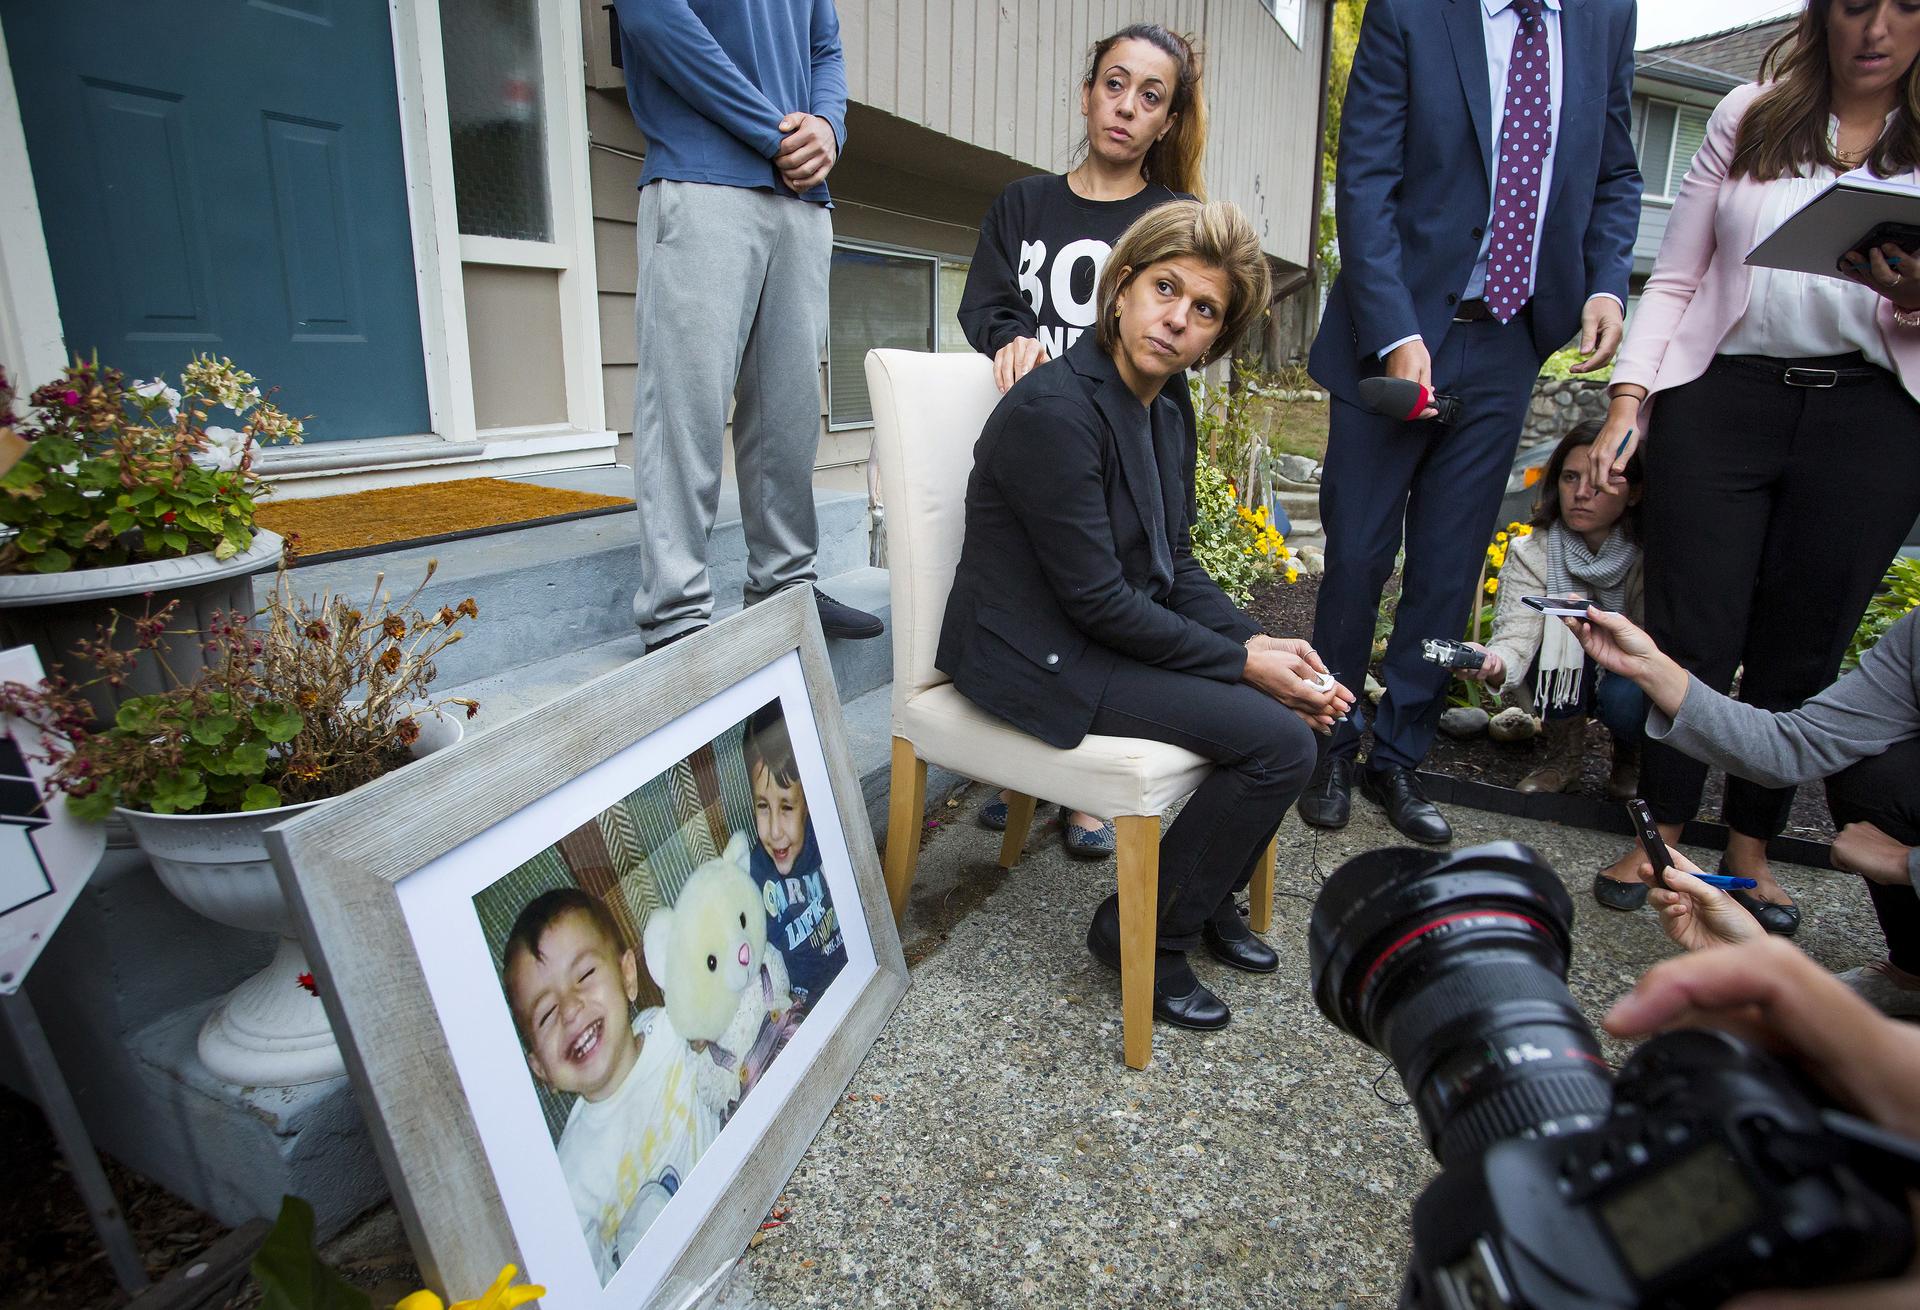 Tima Kurdi, sister of Syrian refugee Abdullah Kurdi, whose sons Alan and Galip and wife Rehan were among 12 people who drowned in Turkey trying to reach Greece, cries while speaking to the media outside her home in British Columbia.